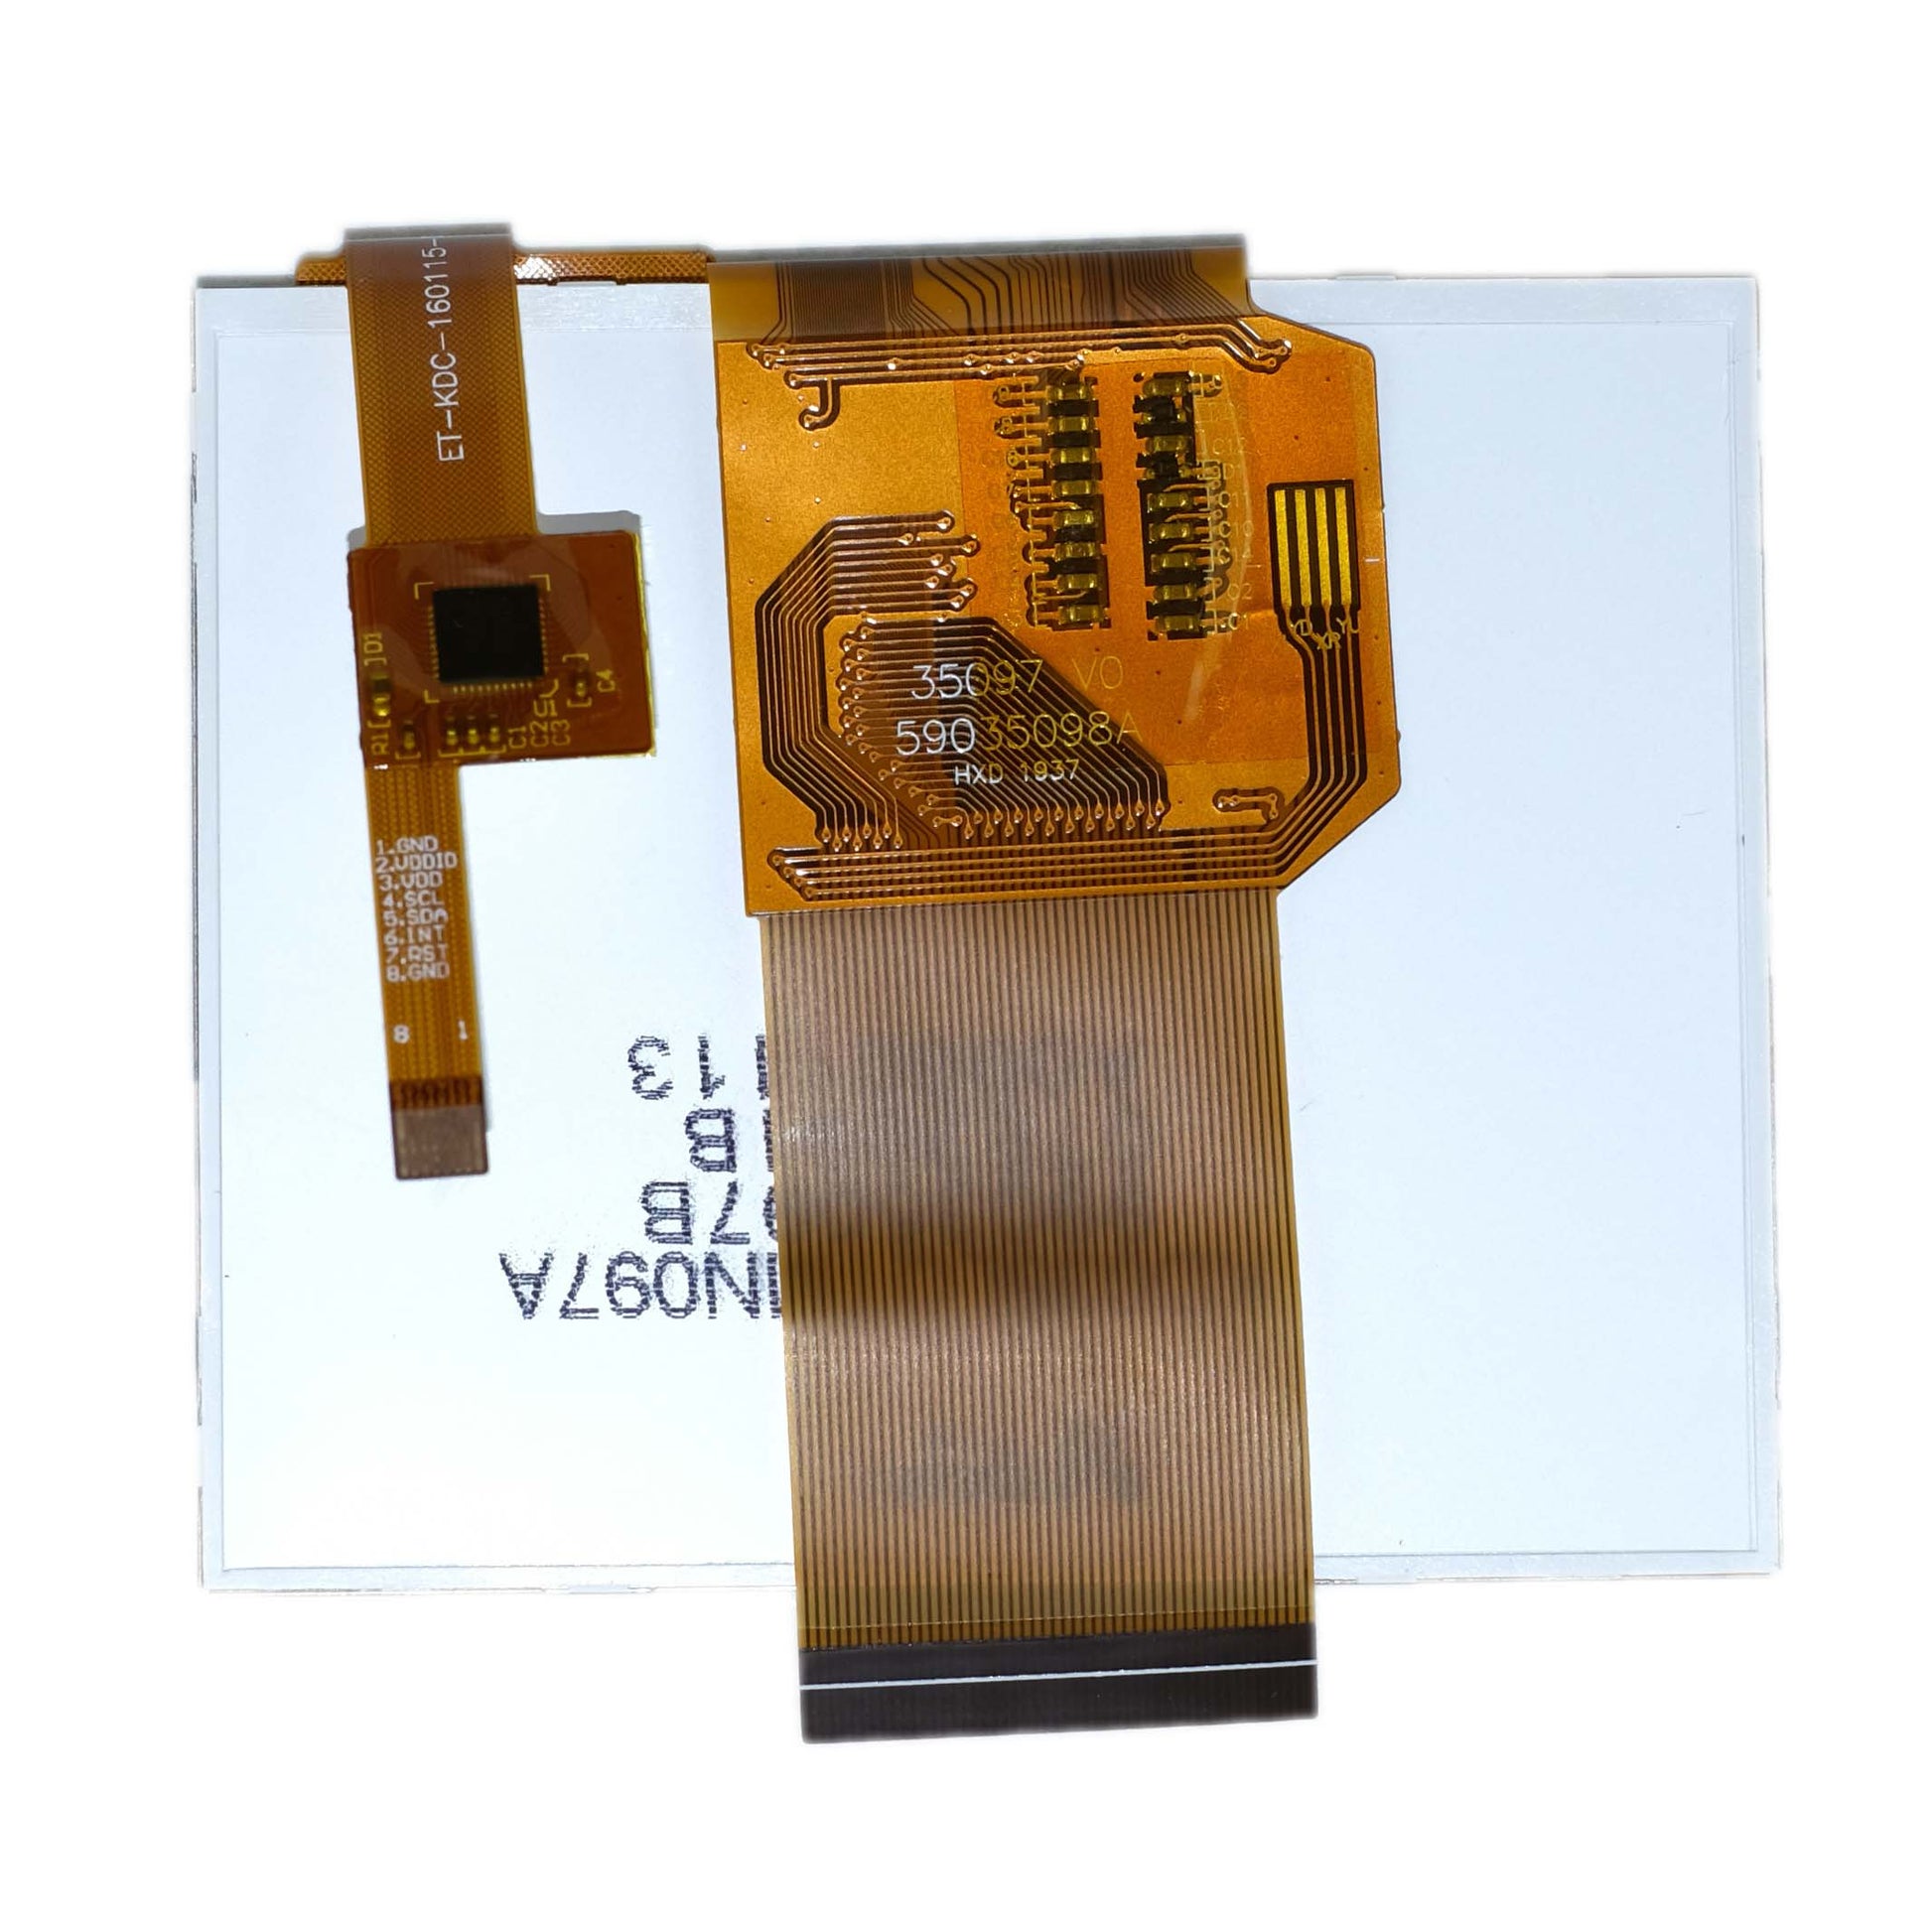 Back of 3.5-inch TFT display panel with 320x240